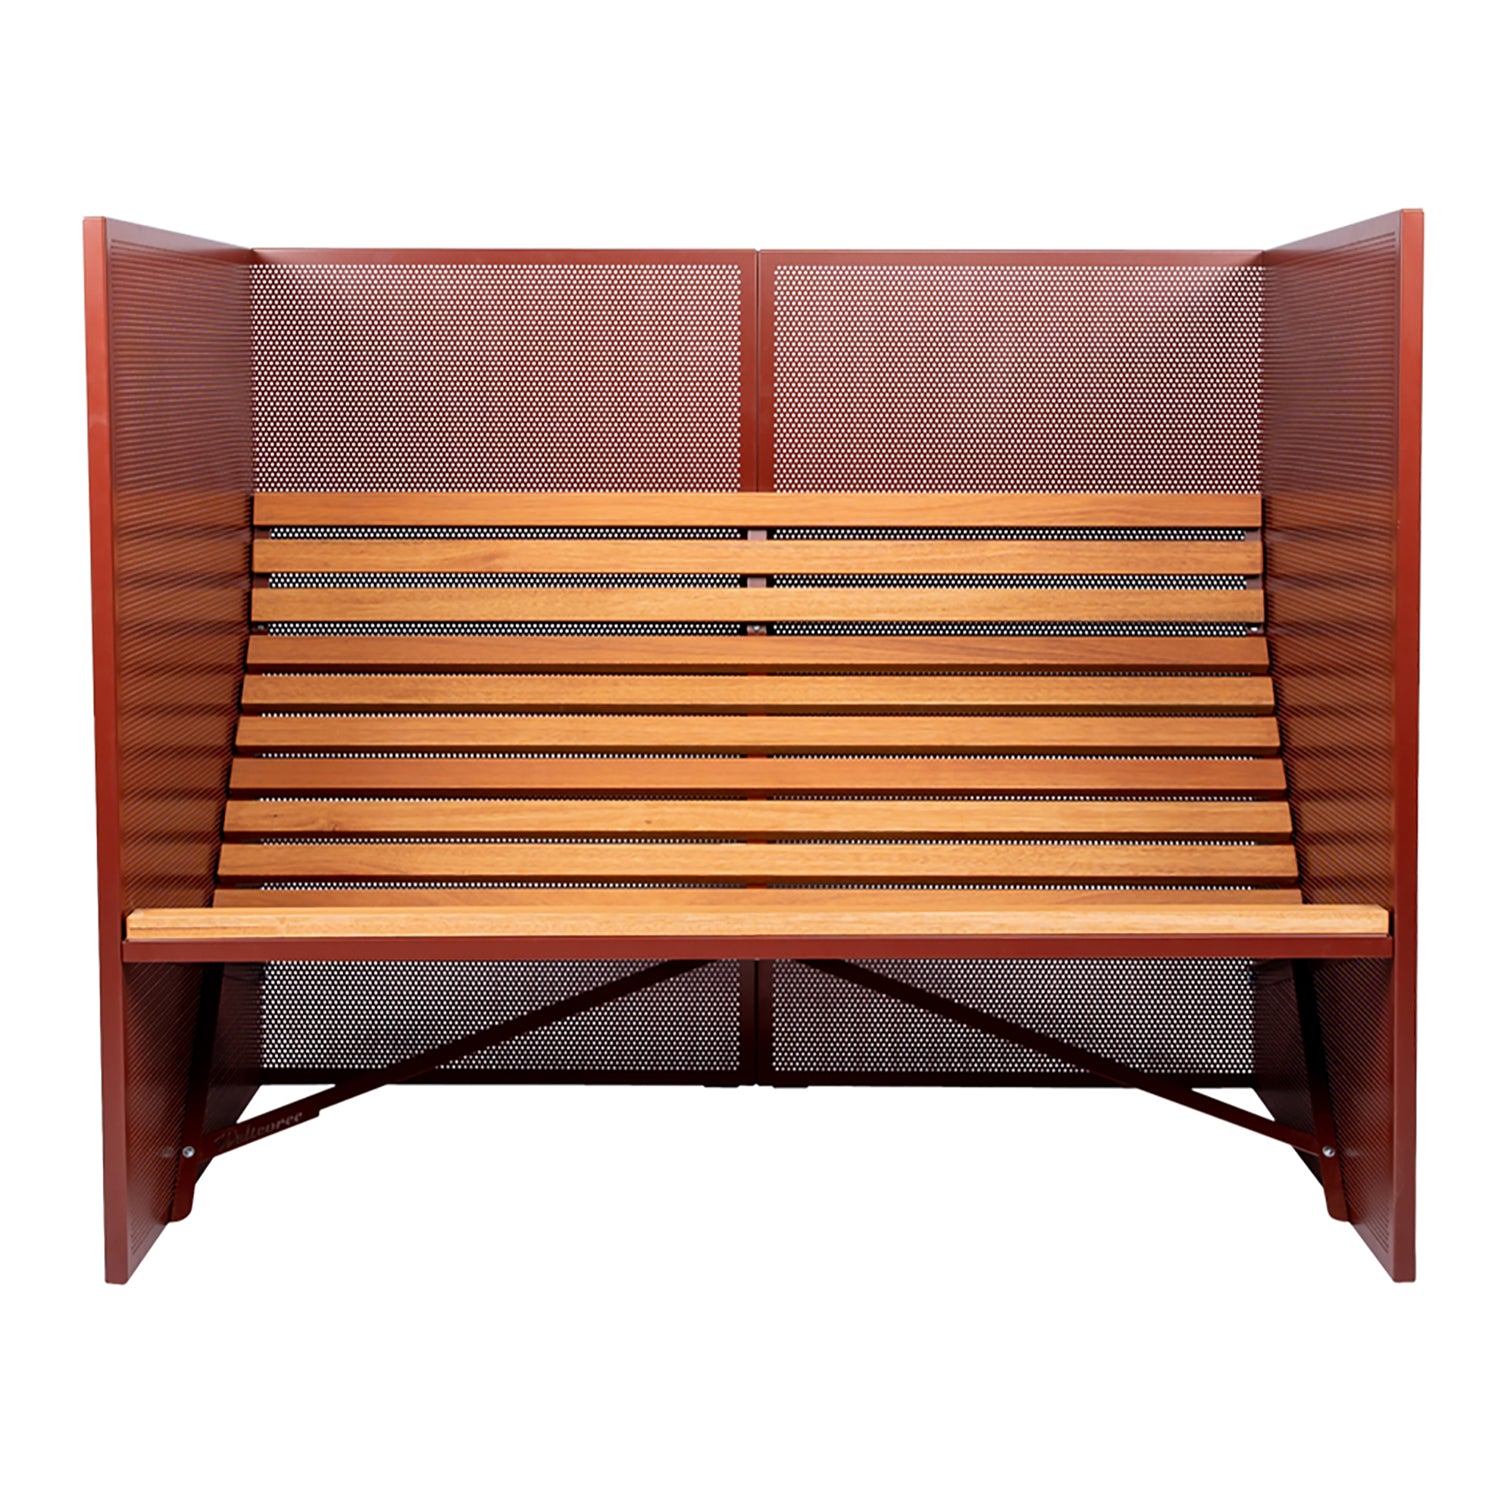 Patio Bench: High +  Oxide Red